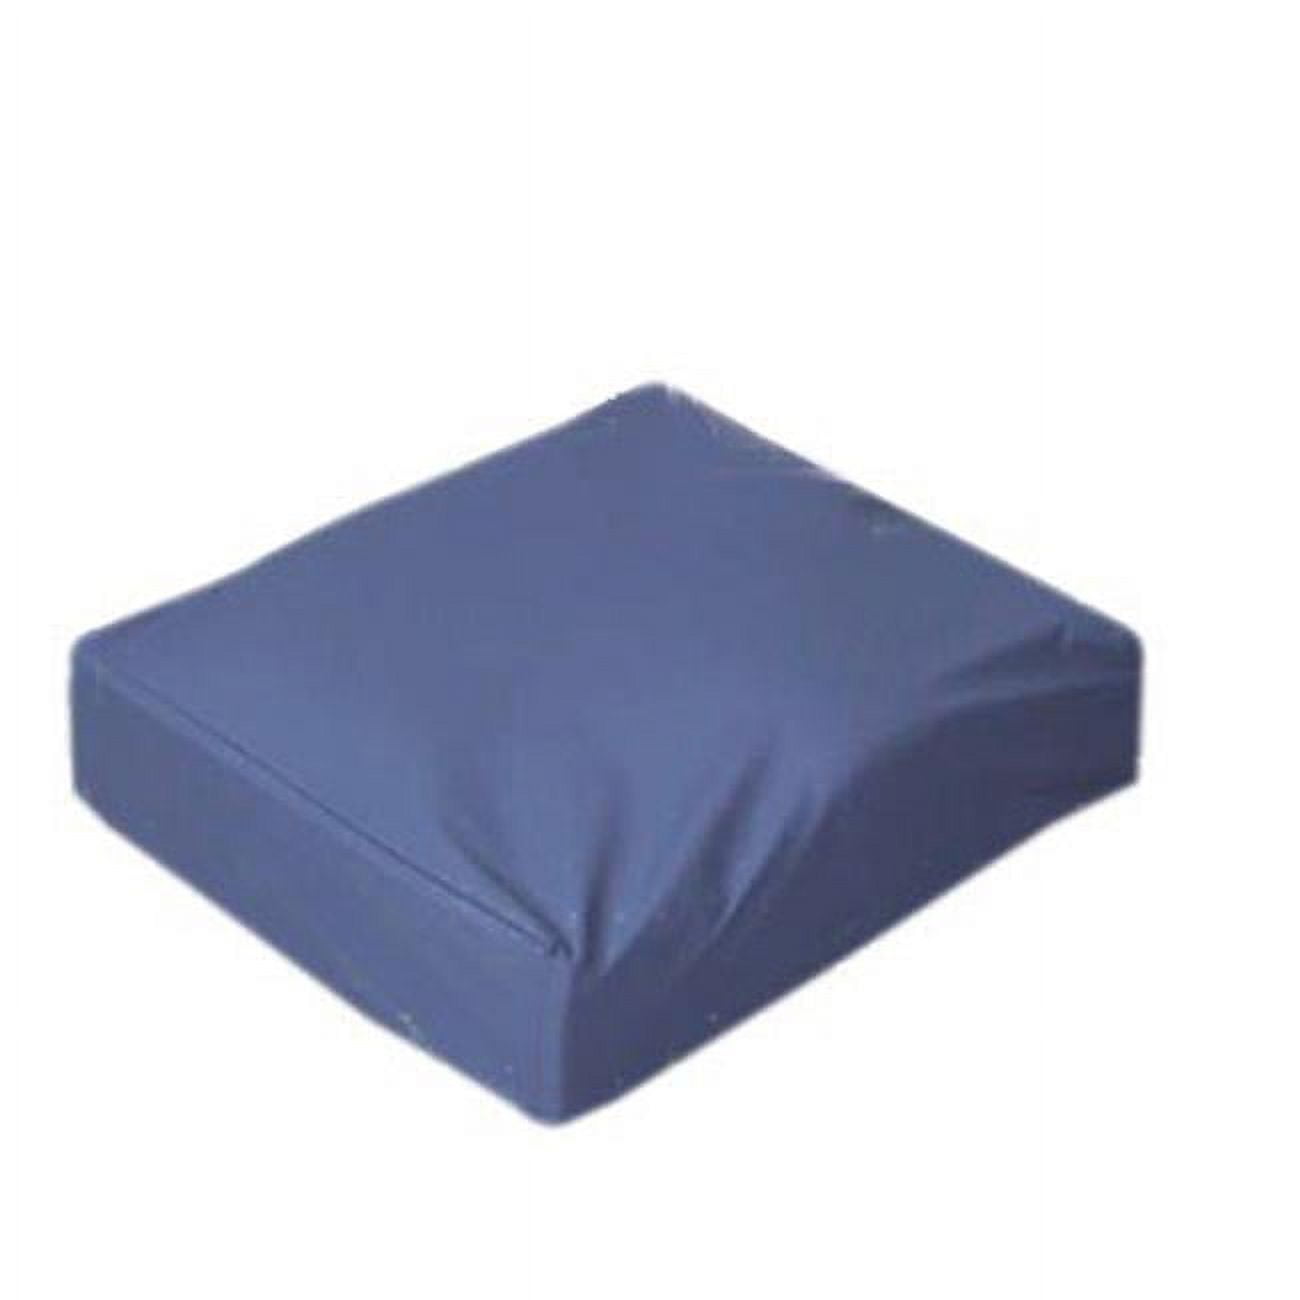 COMFYSURE XL Firm Seat Cushion Pad for Bariatric Overweight Users